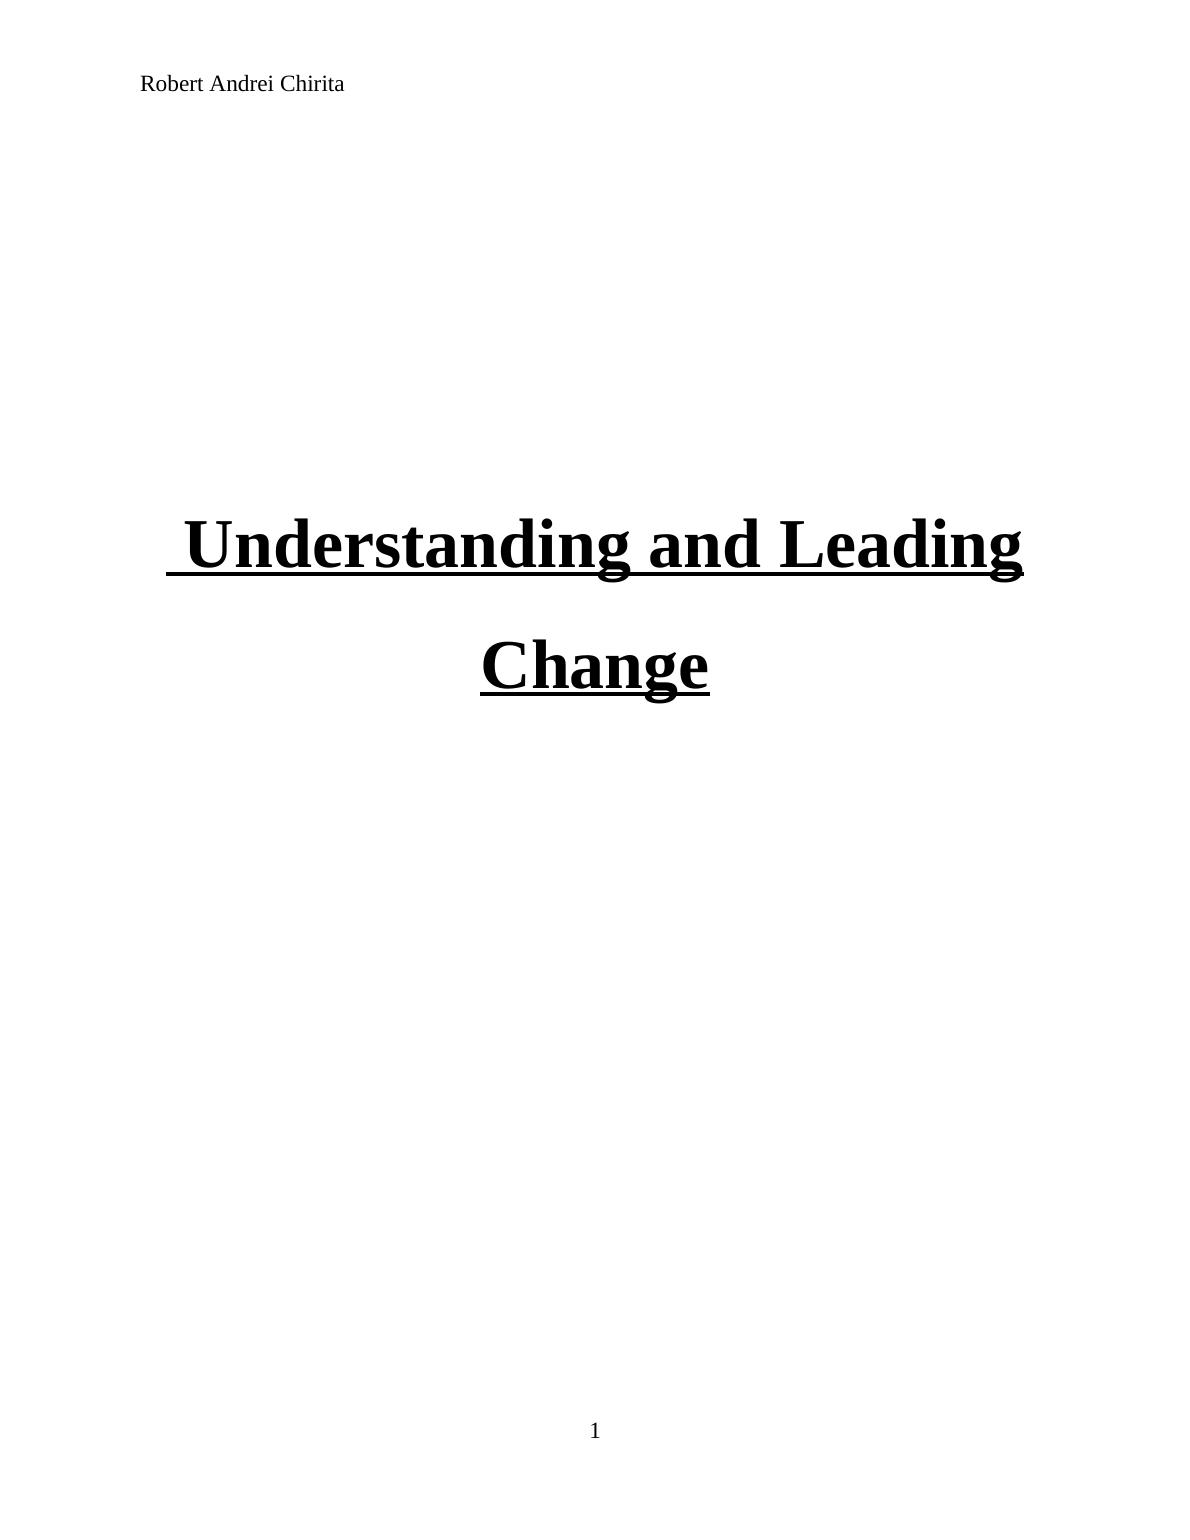 Understanding and Leading Change in Organisations_1